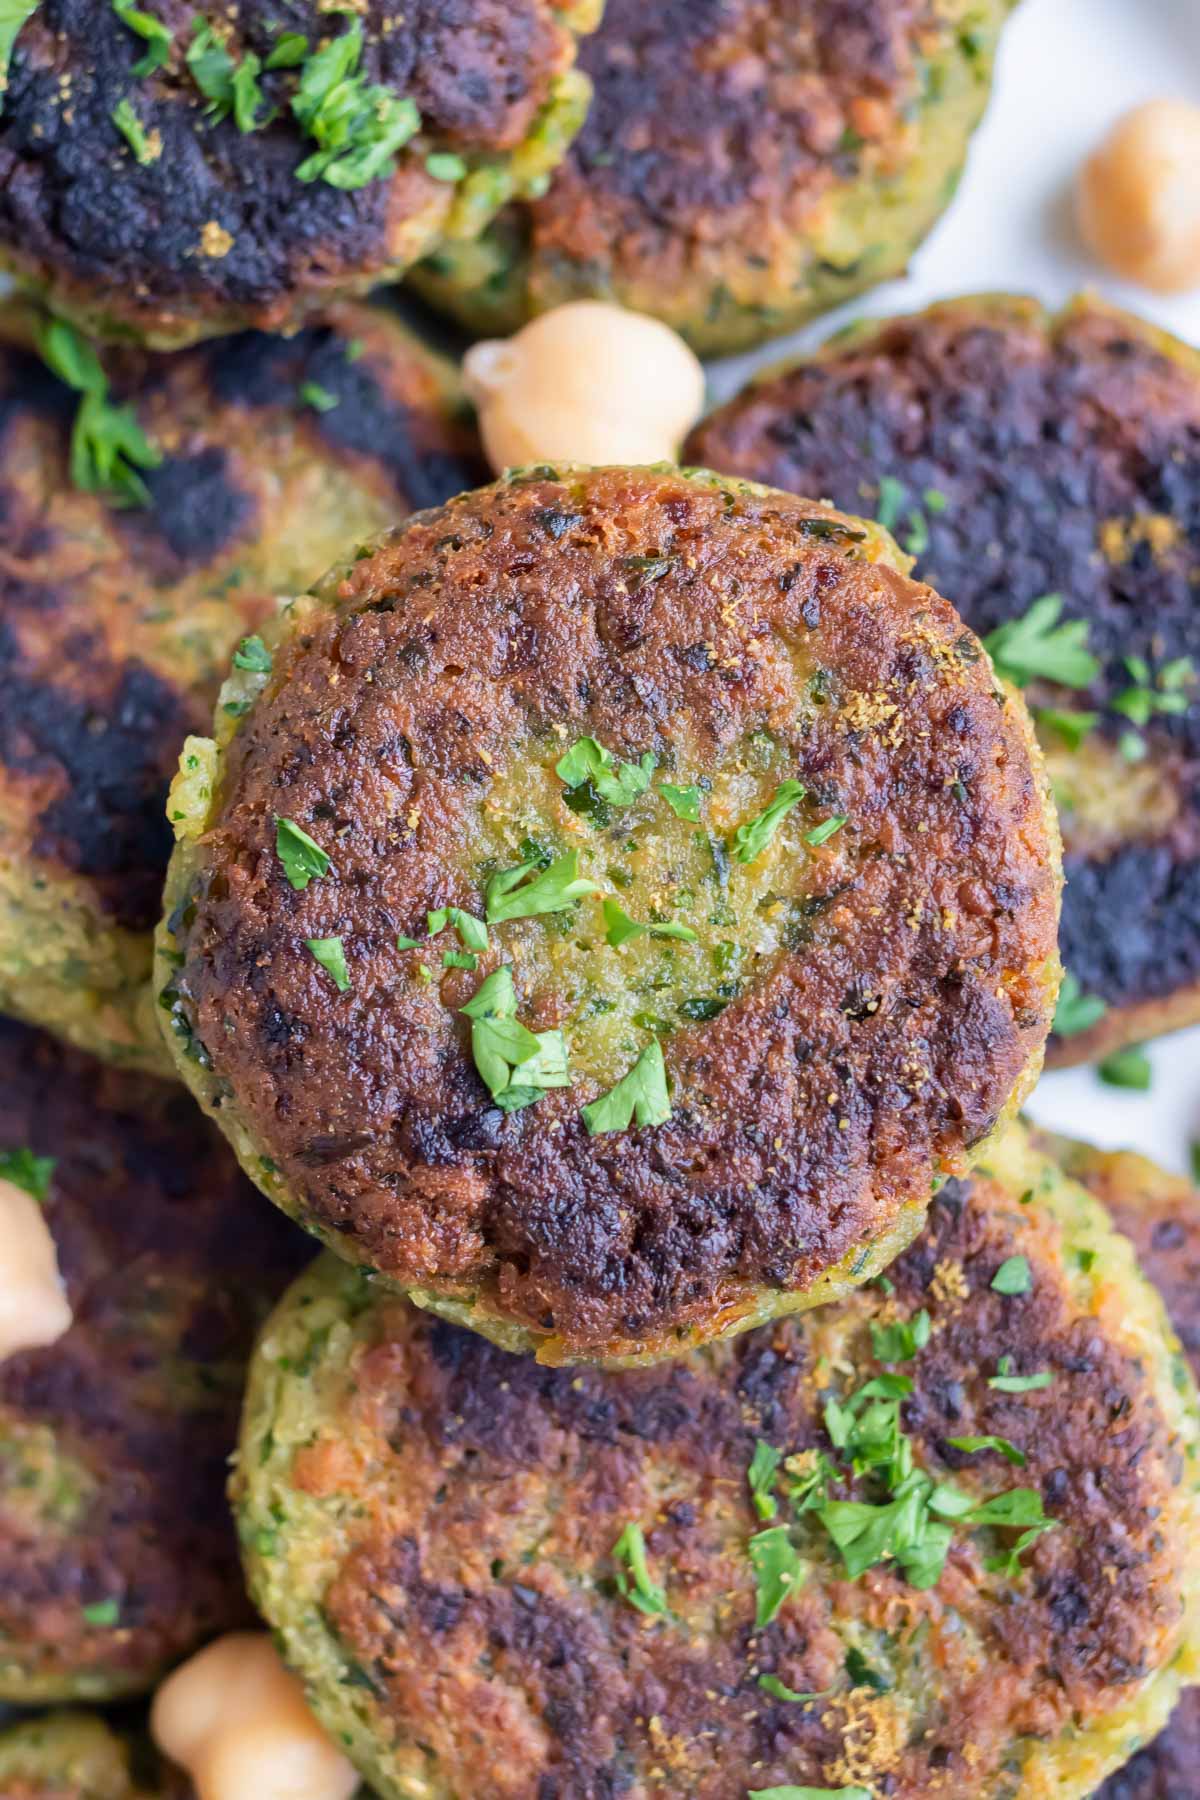 Falafel is a traditional Greek recipe made with chickpeas.